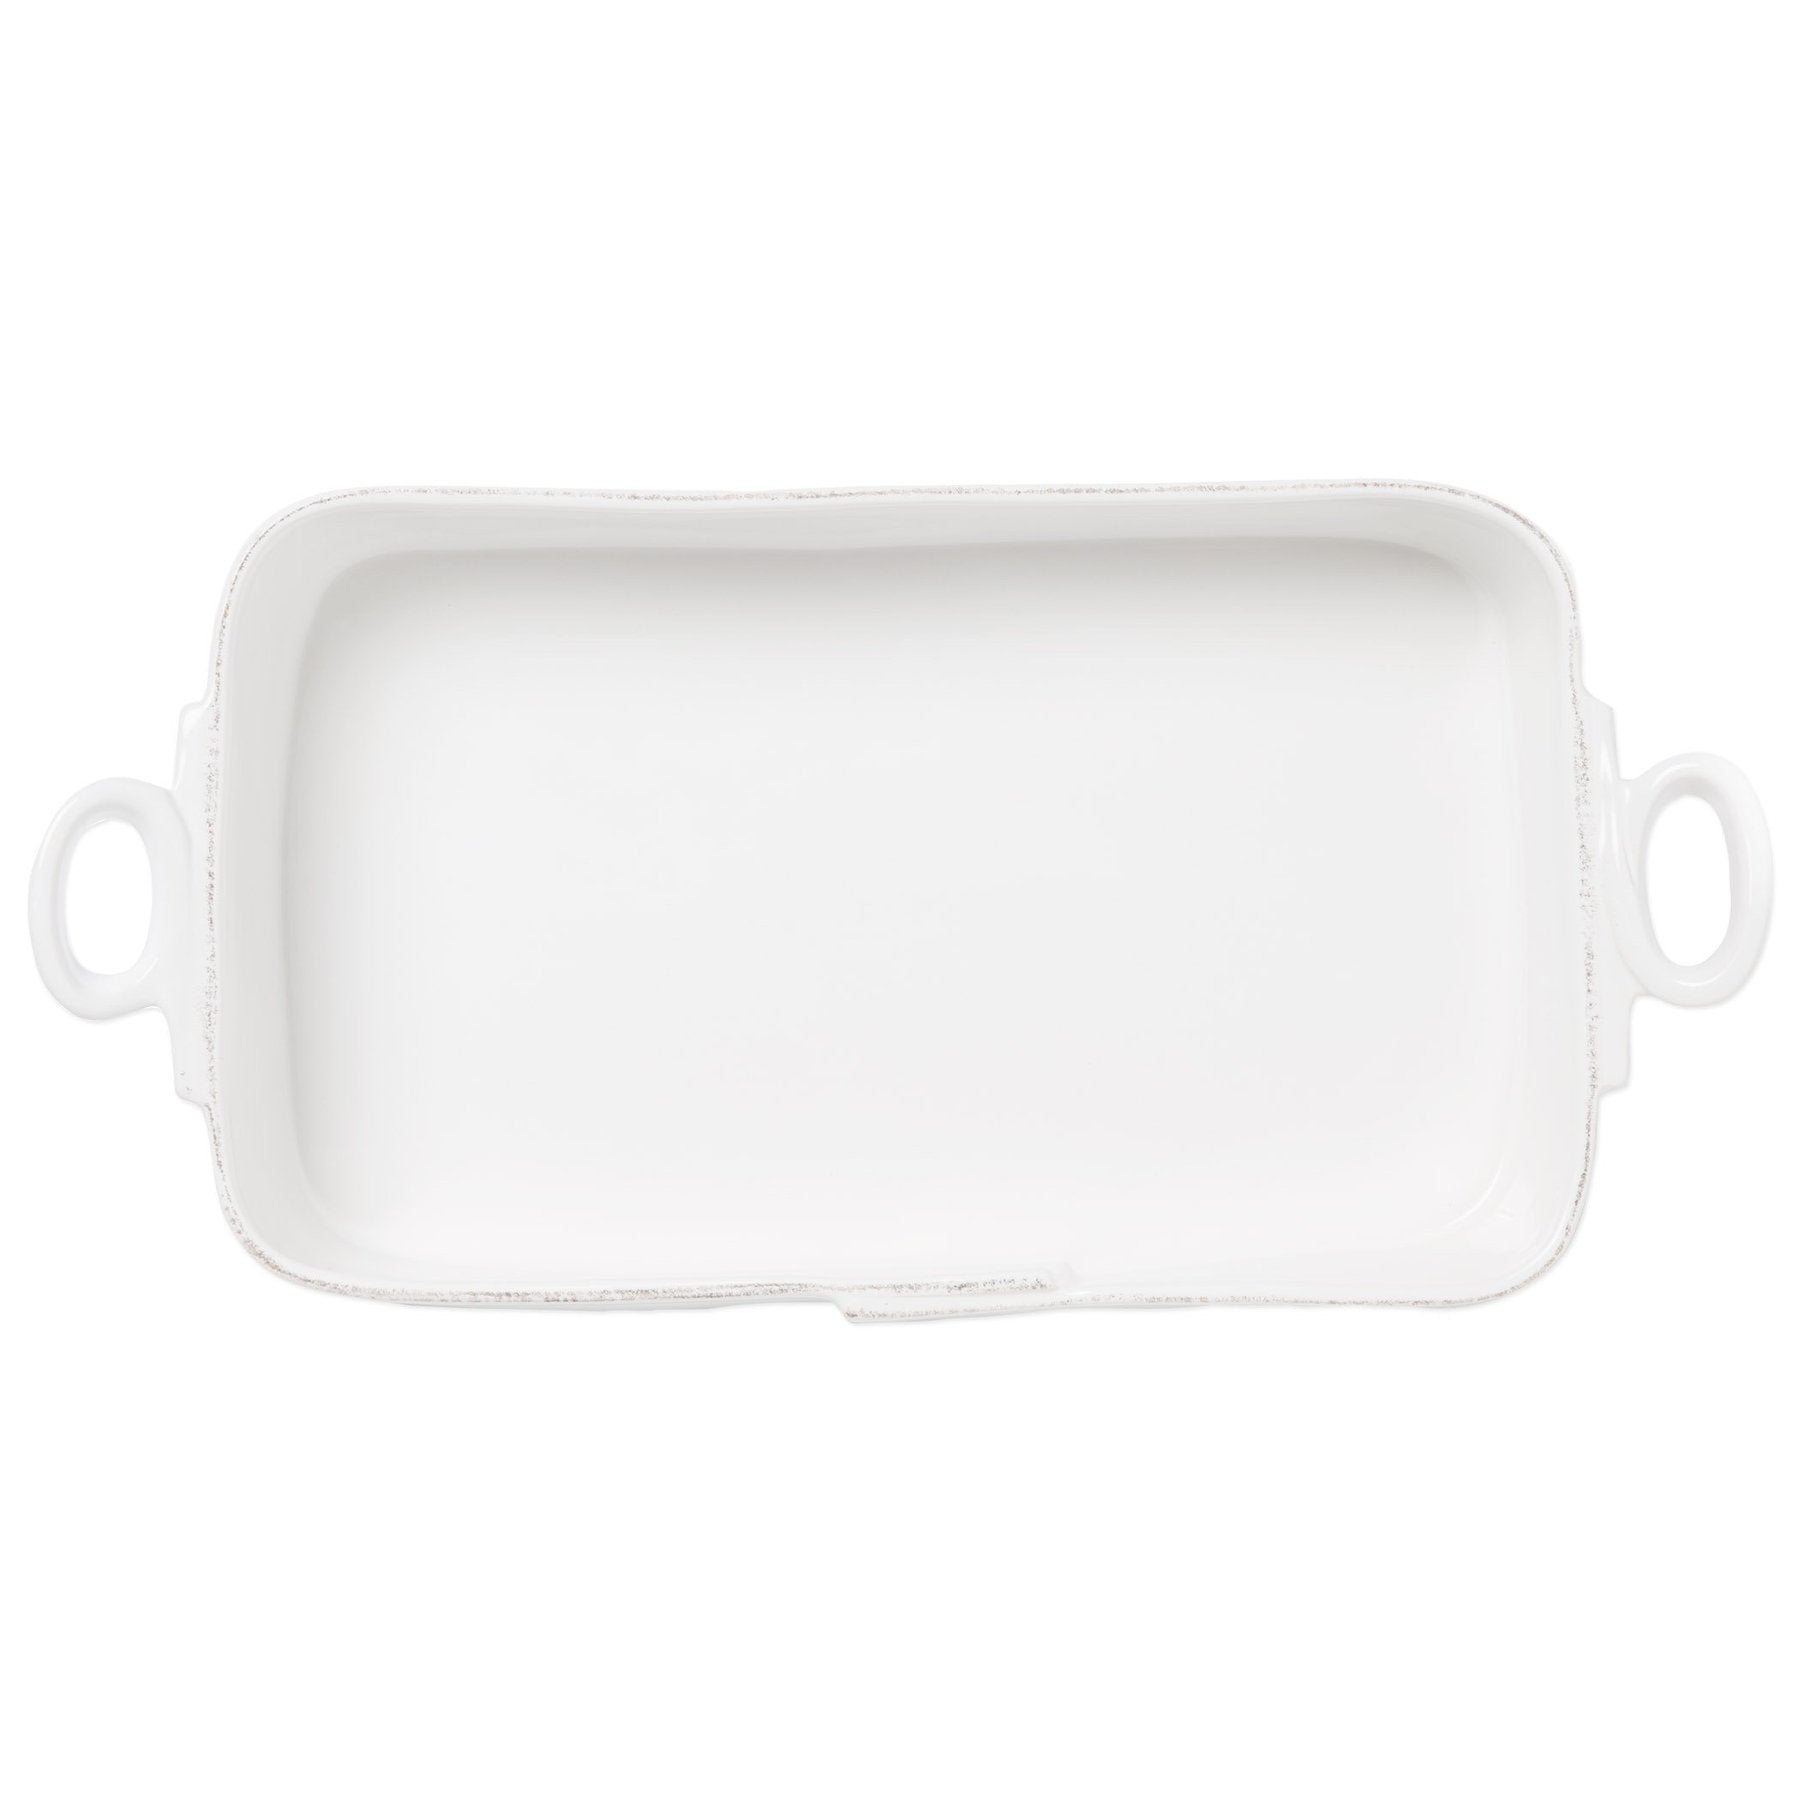 top view of baking dish on white background.